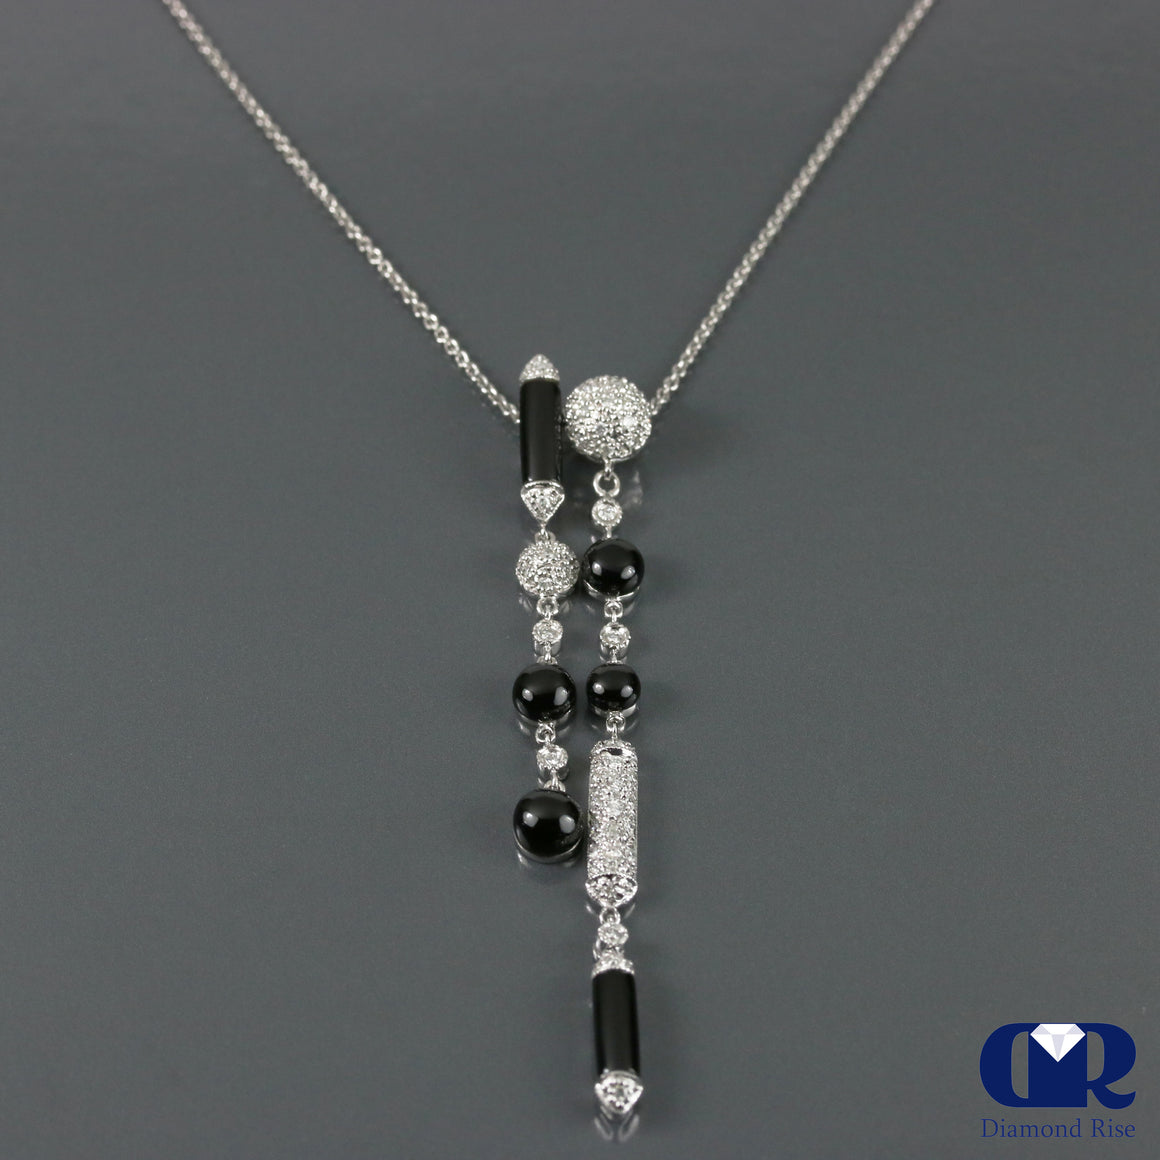 Diamond & Onyx Pendant Necklace In 18K White Gold With 16" Chain - Diamond Rise Jewelry